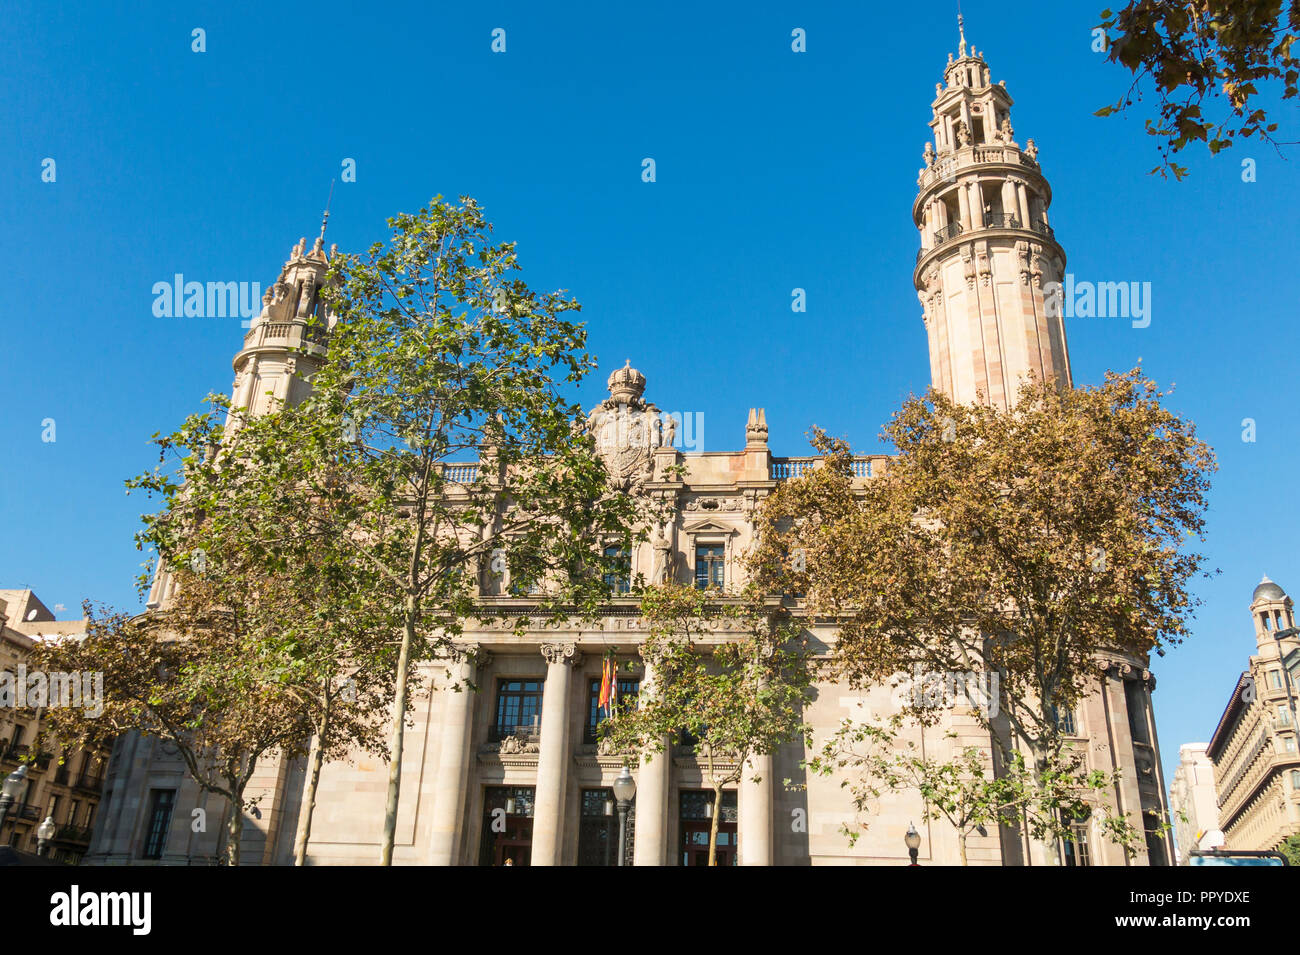 The famous central Post Office building in the city of Barcelona, Spain. The central post office is located between Via Laietana street and Christophe Stock Photo